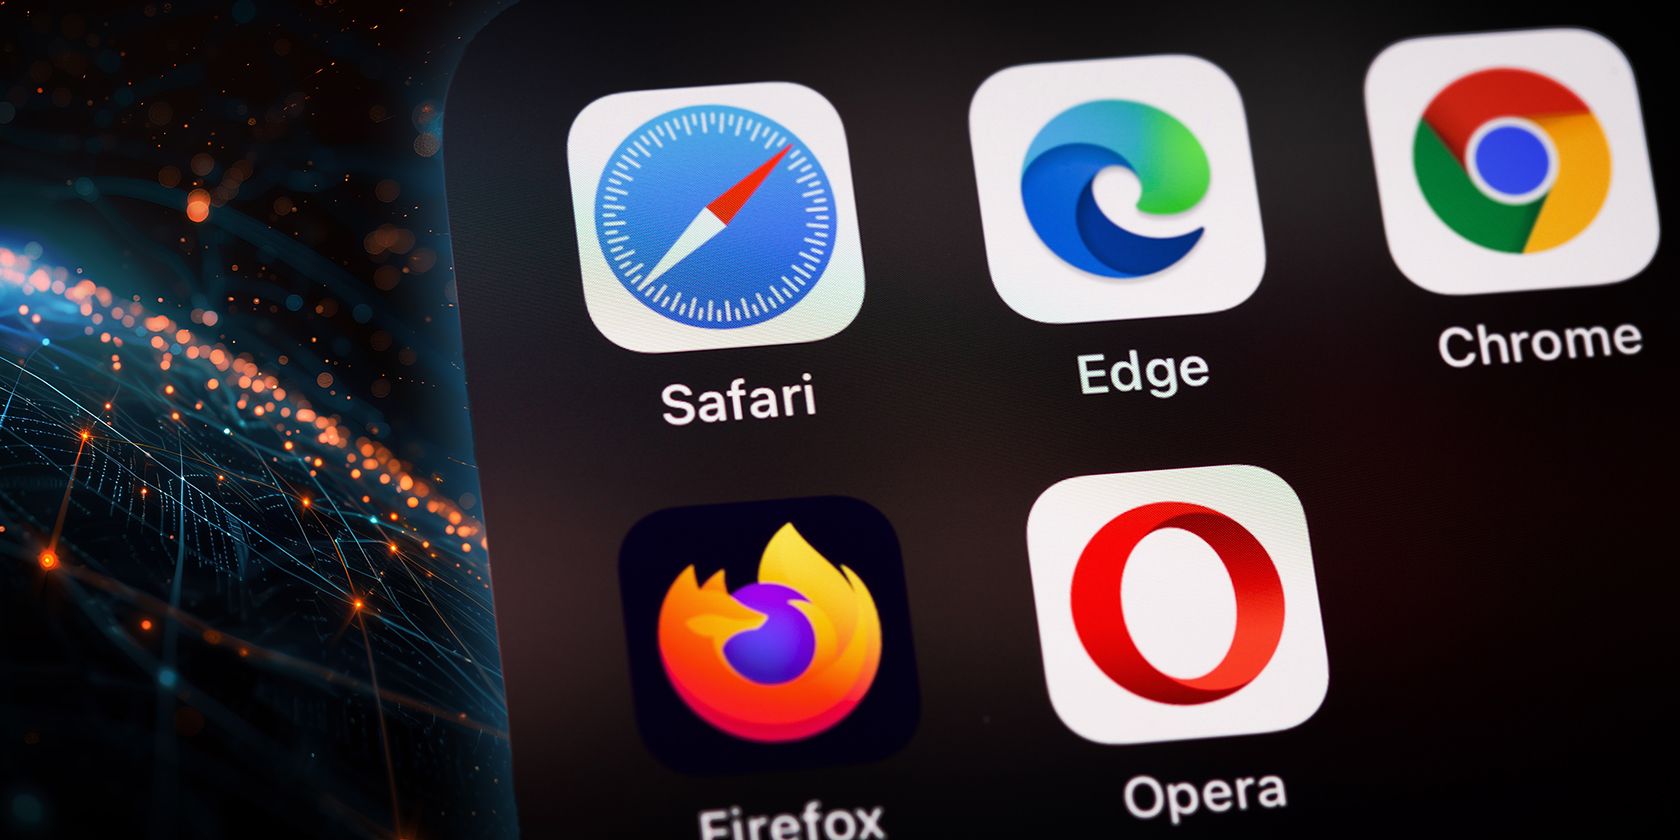 App icons for Safari, Edge, Chrome, Firefox, and Opera browsers on a digital device screen, with a network backdrop.